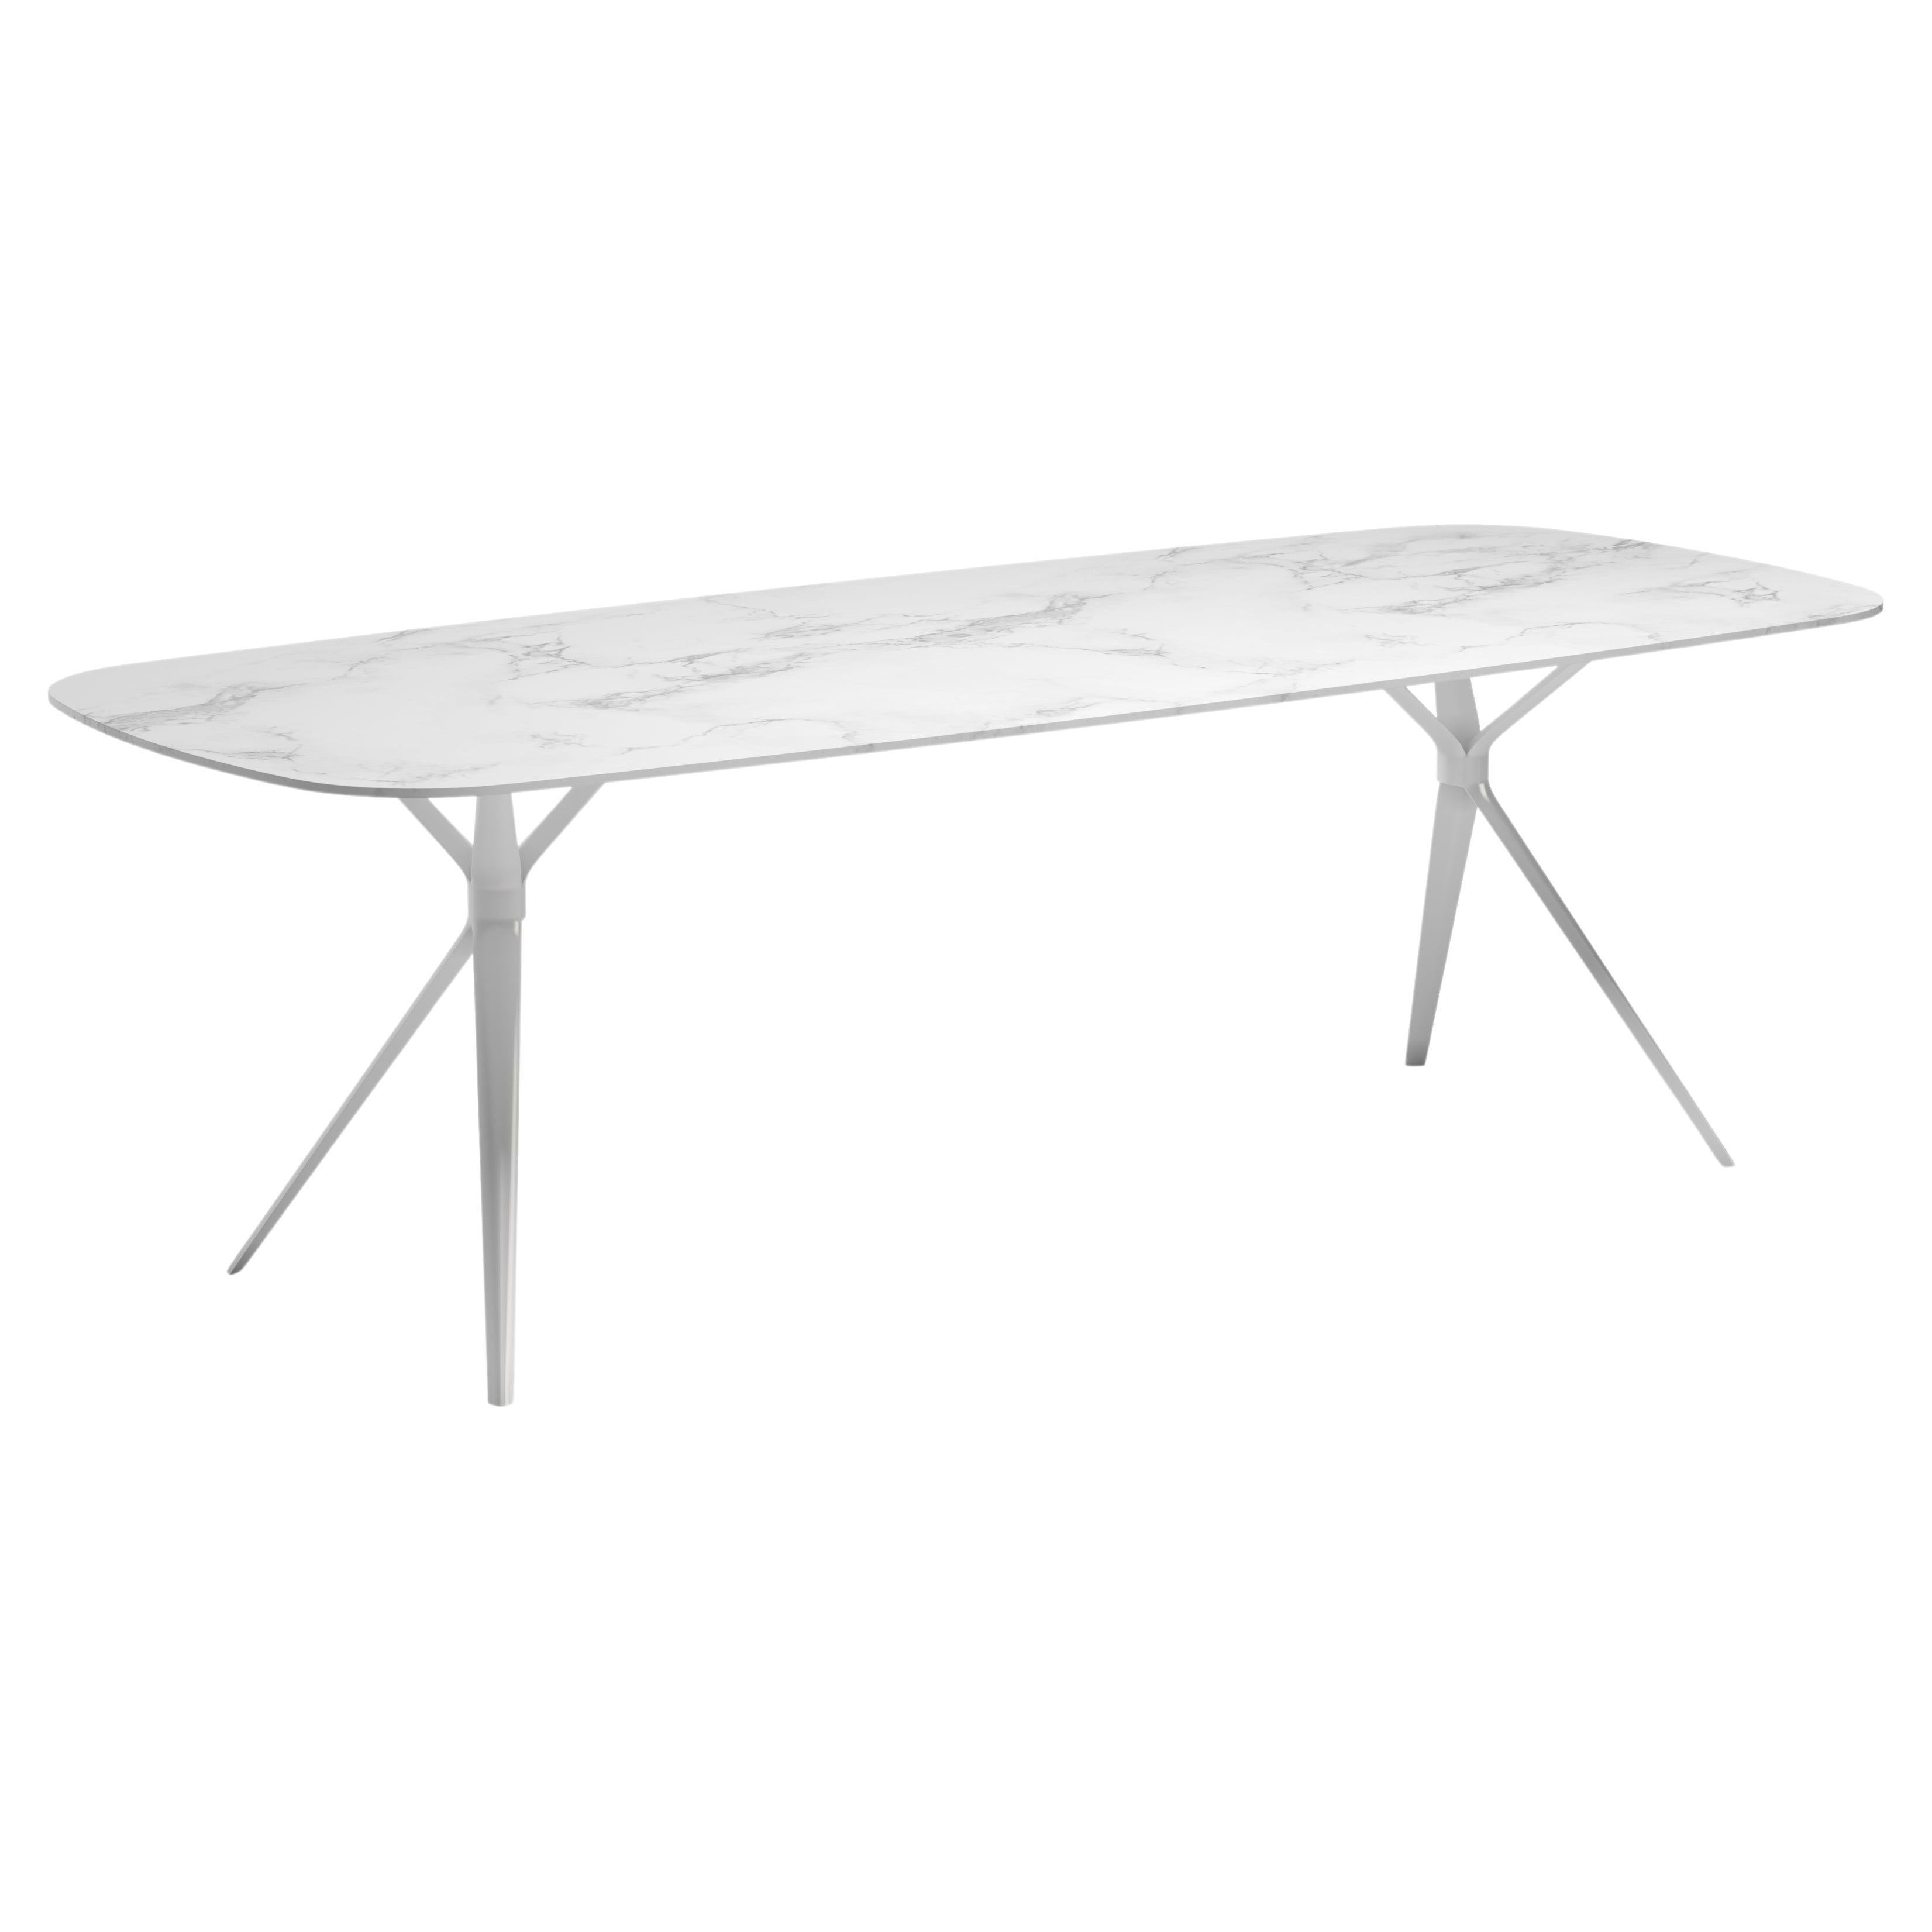 Gemma, Pike Dining Table for 6 by Snoc